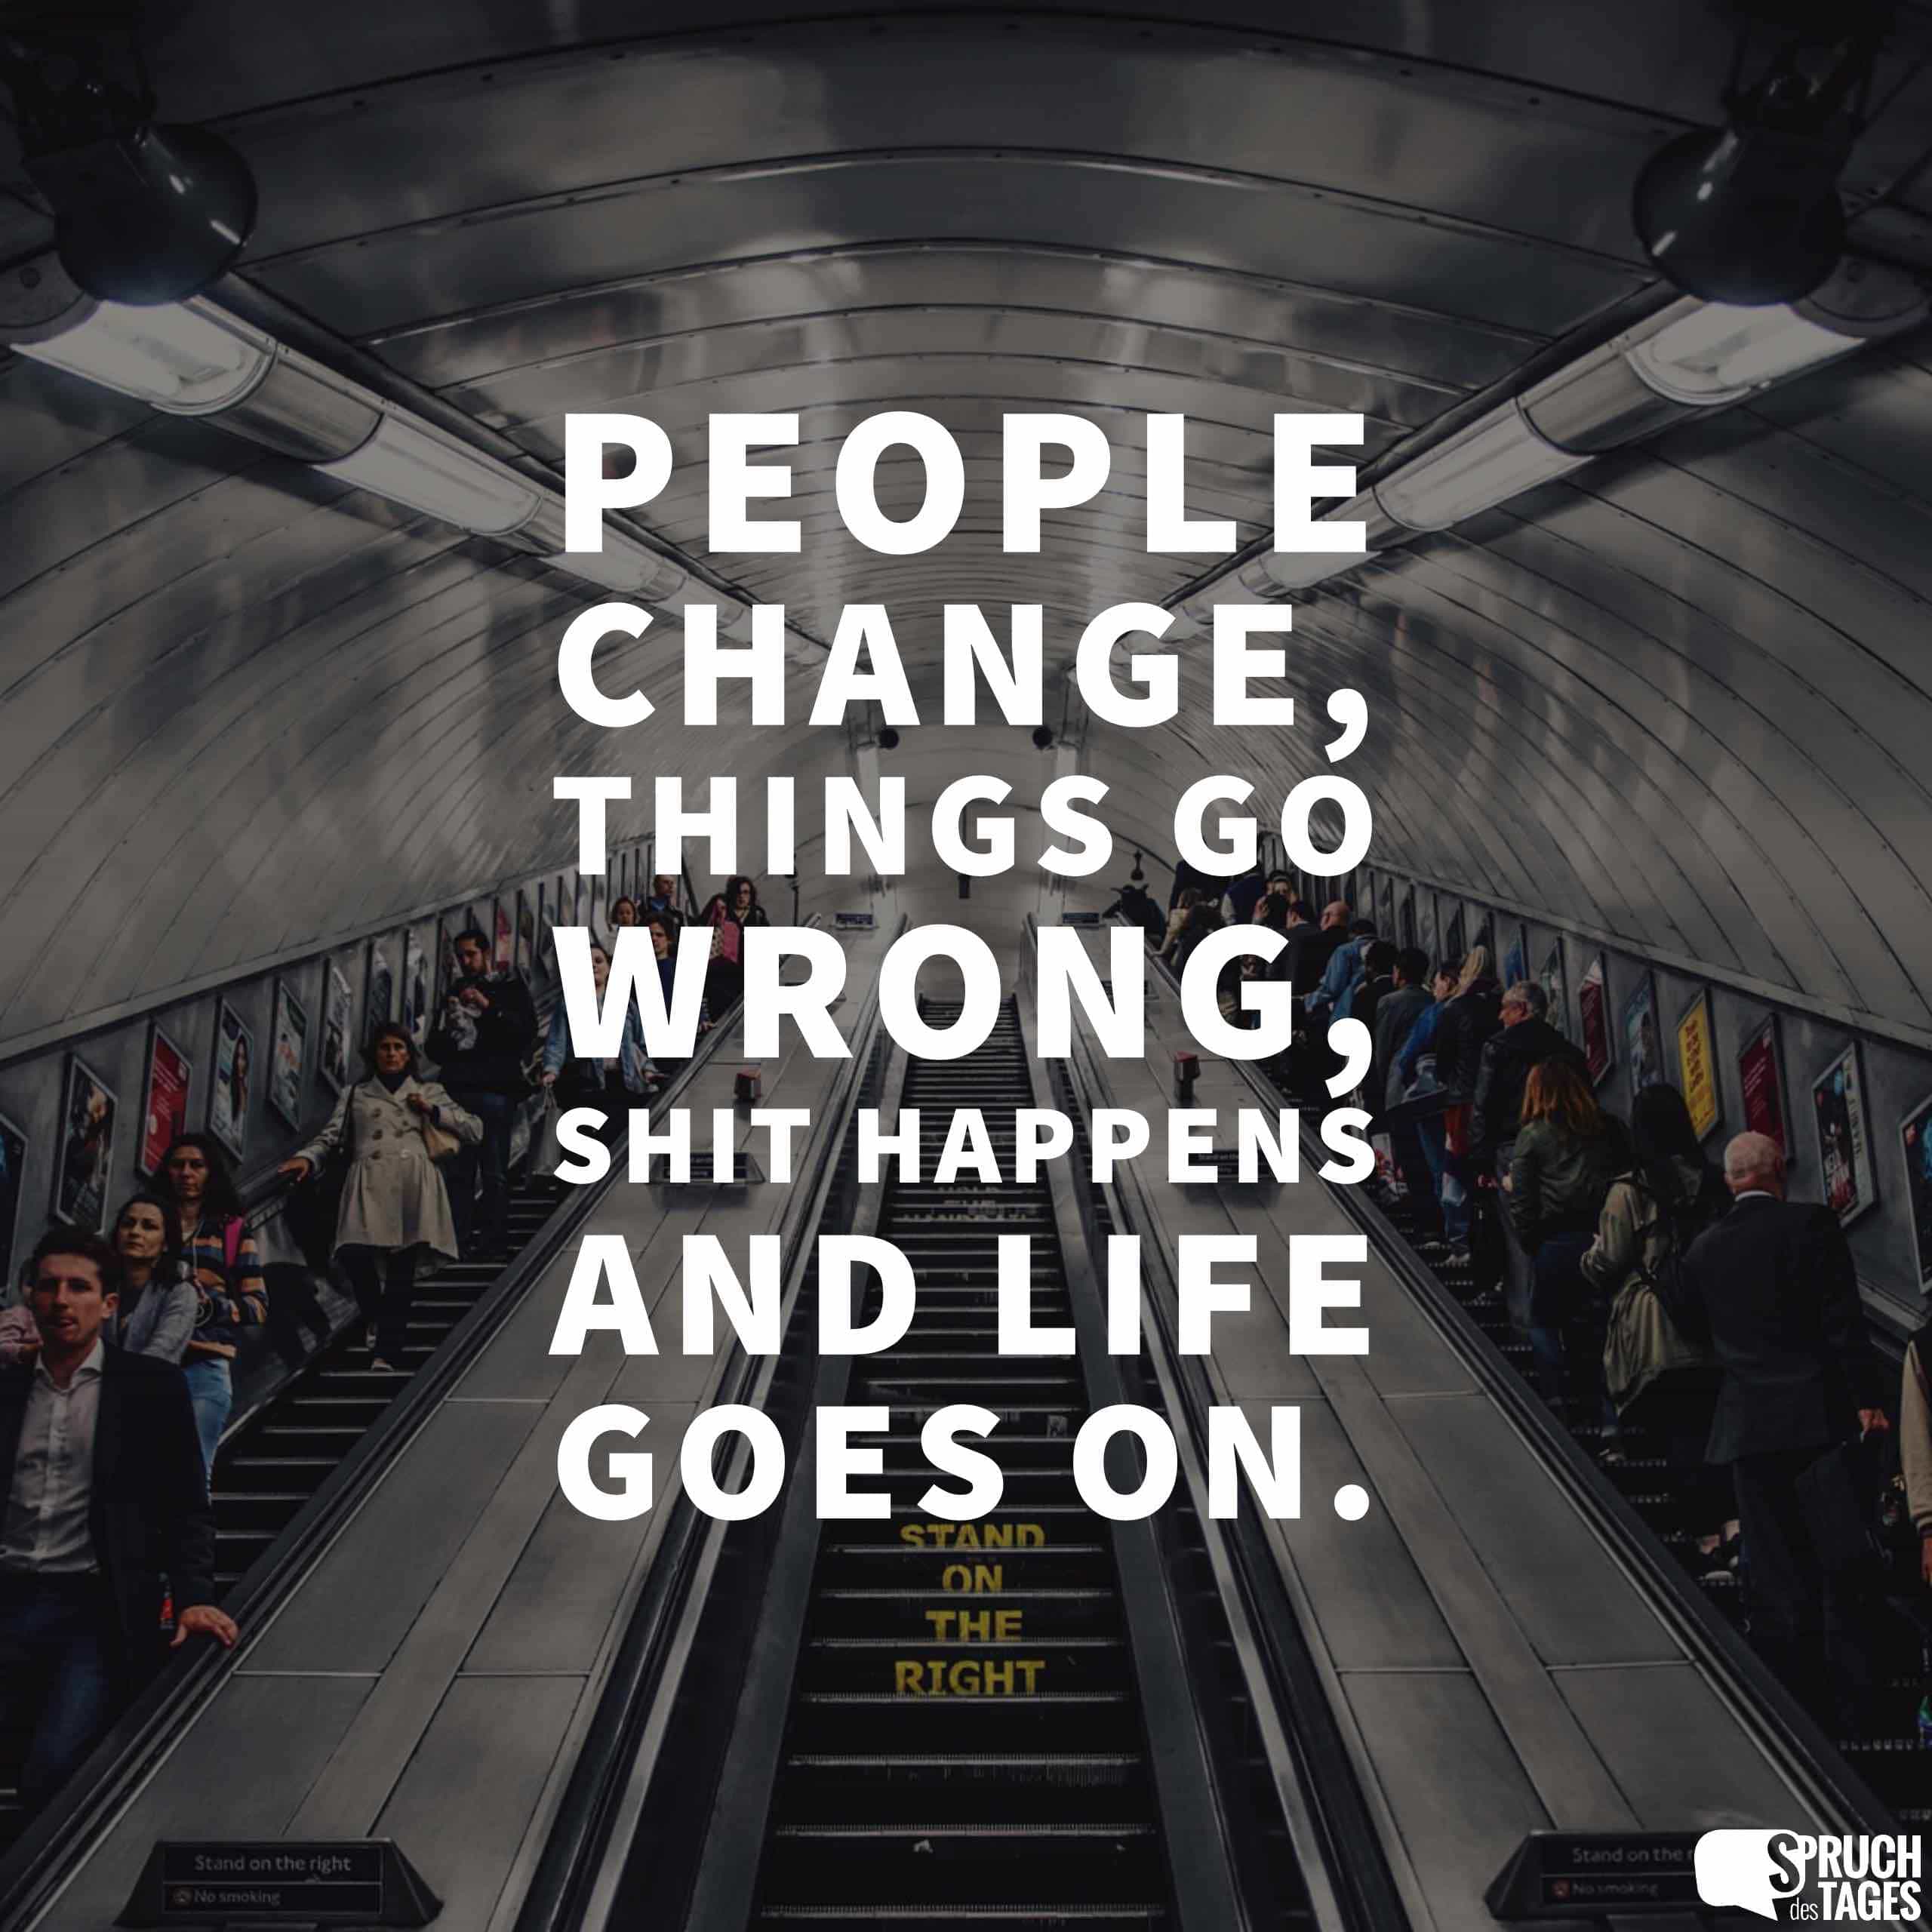 People change, things go wrong, shit happens and life goes on.